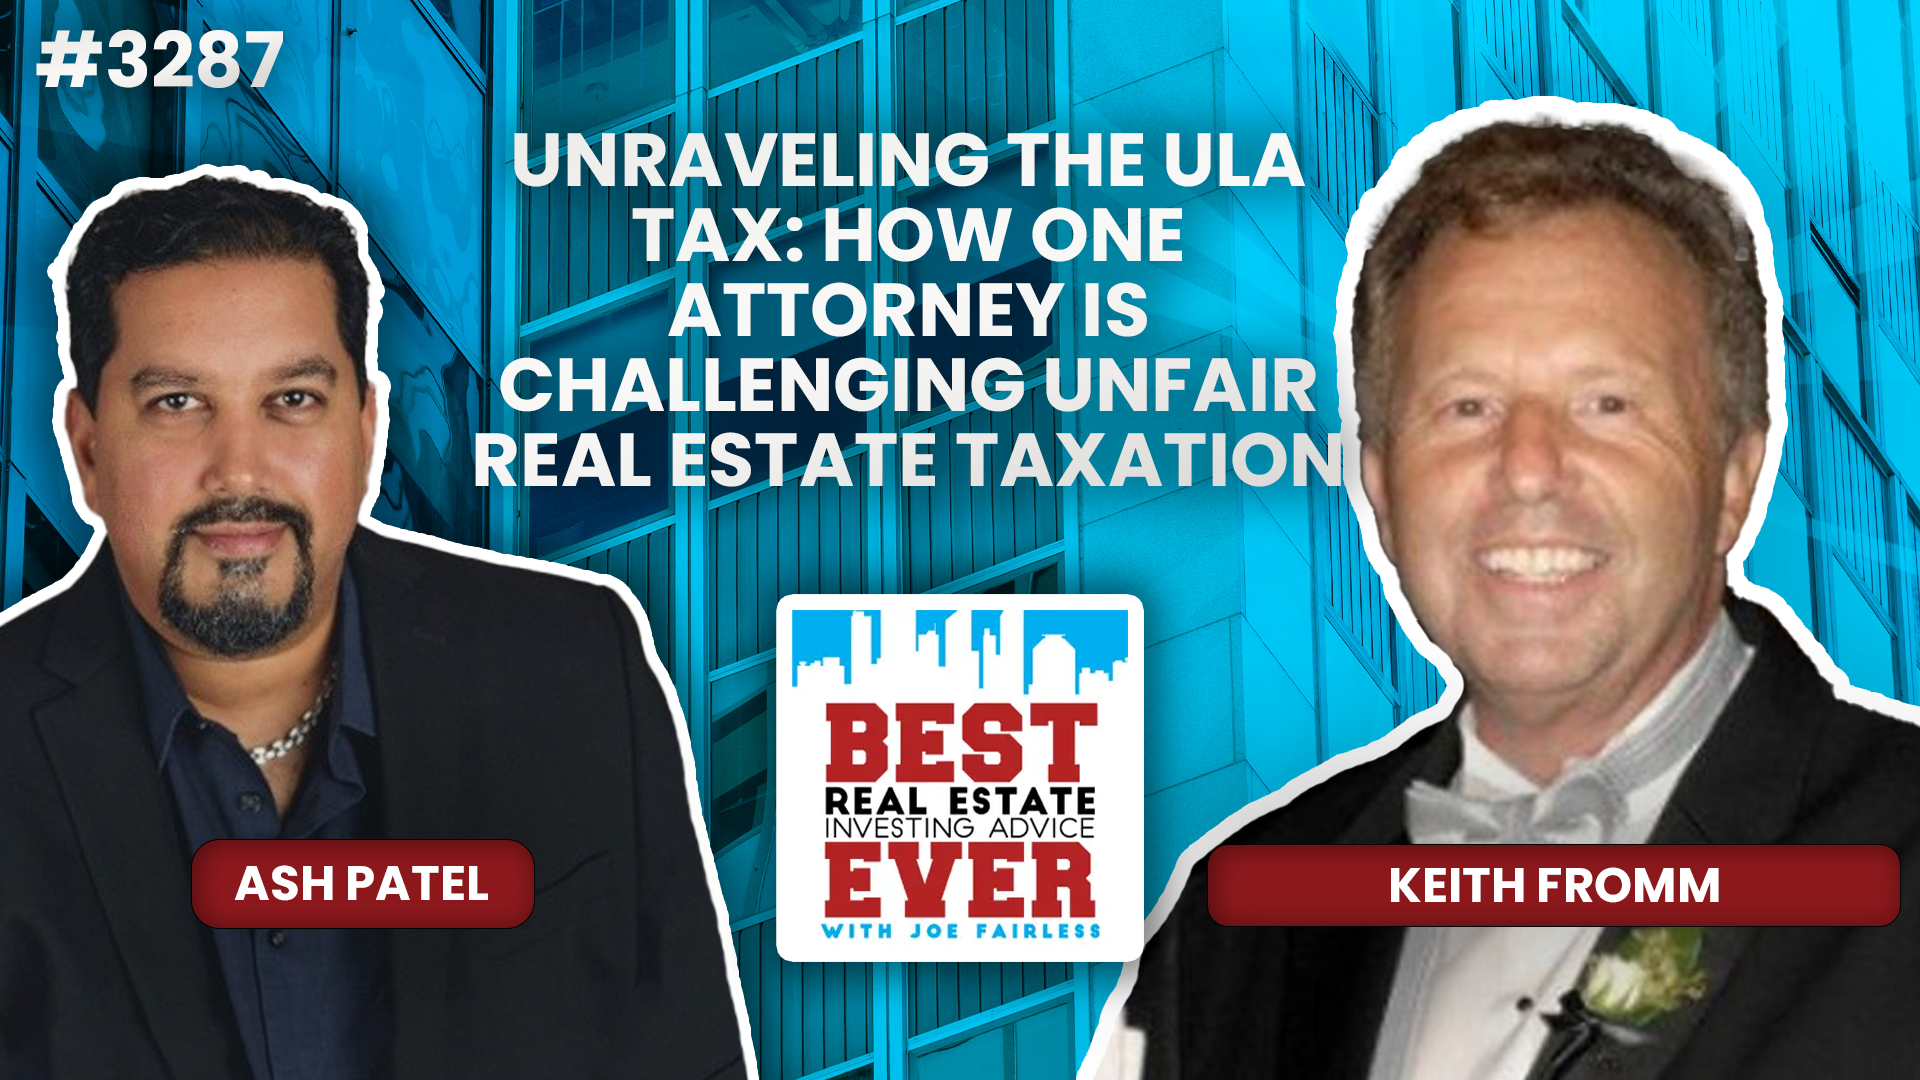 JF3287: Keith Fromm - Unraveling the ULA Tax: How One Attorney is Challenging Unfair Real Estate Taxation